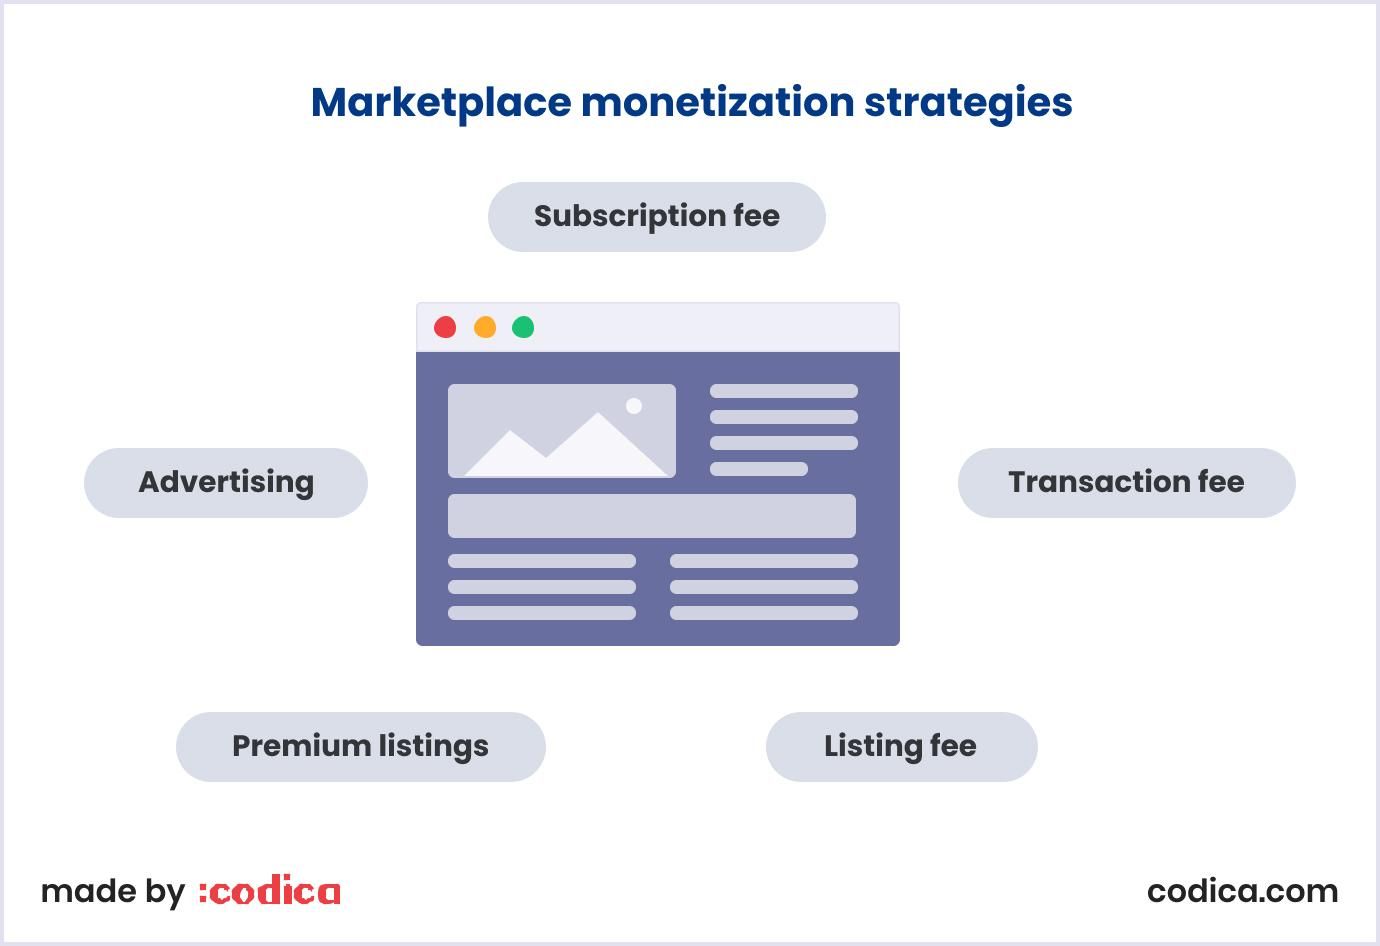 Monetization strategies for services marketplaces